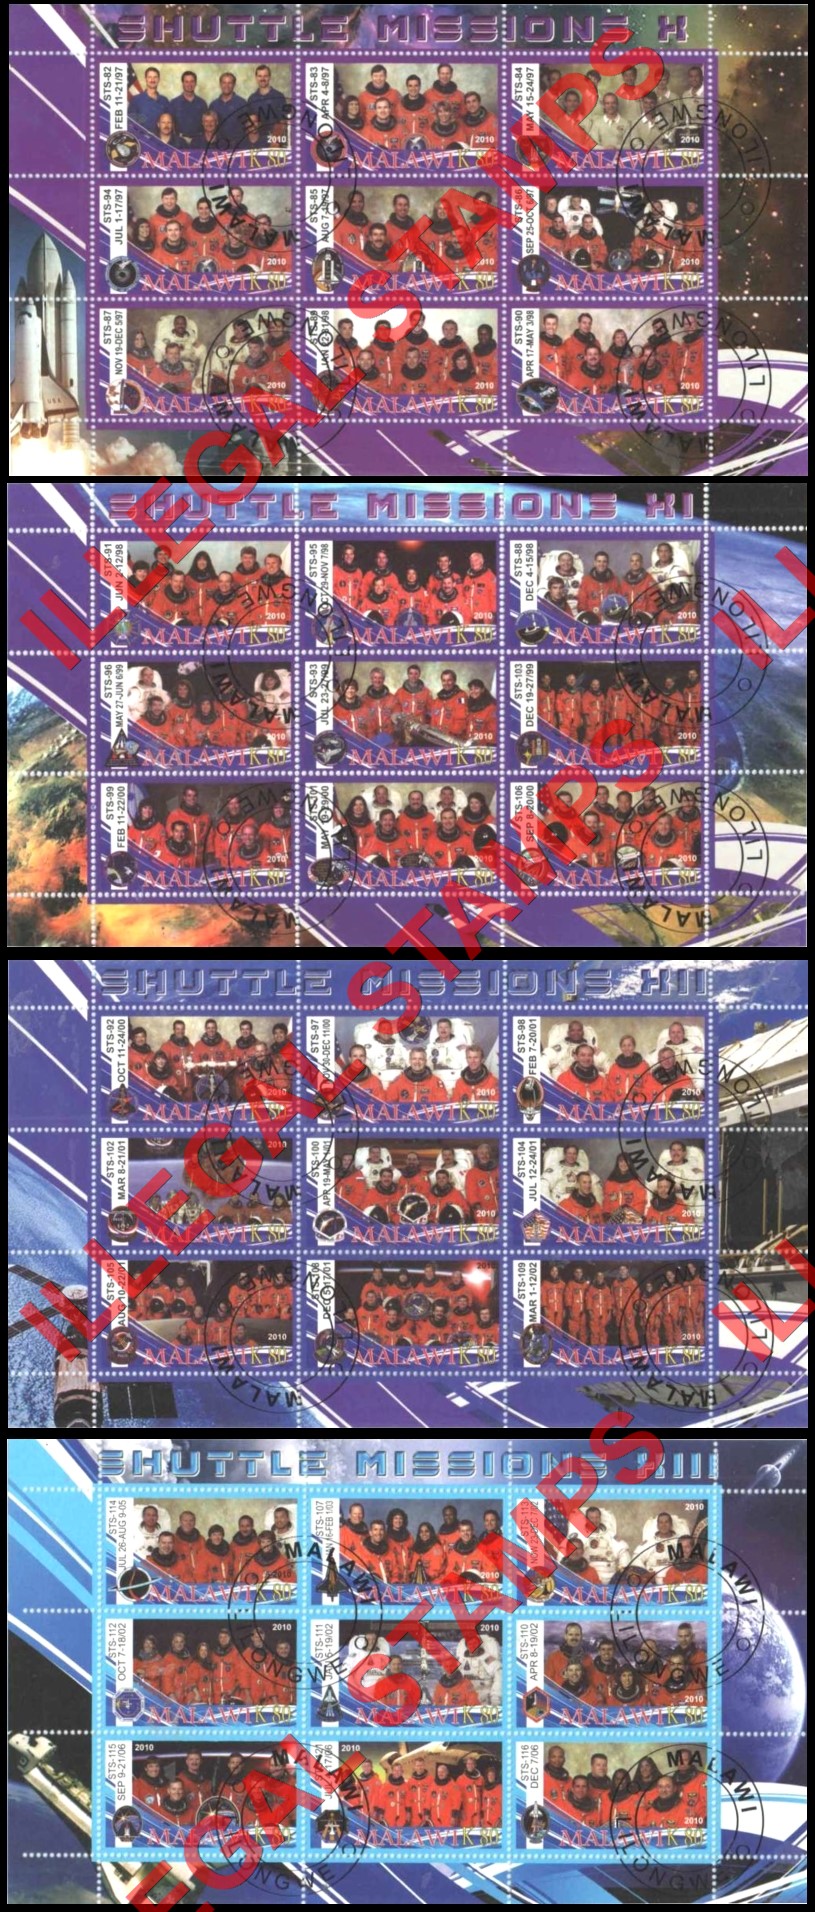 Malawi 2010 Space Shuttle Missions Illegal Stamp Sheetlets of 9 (Part 4)